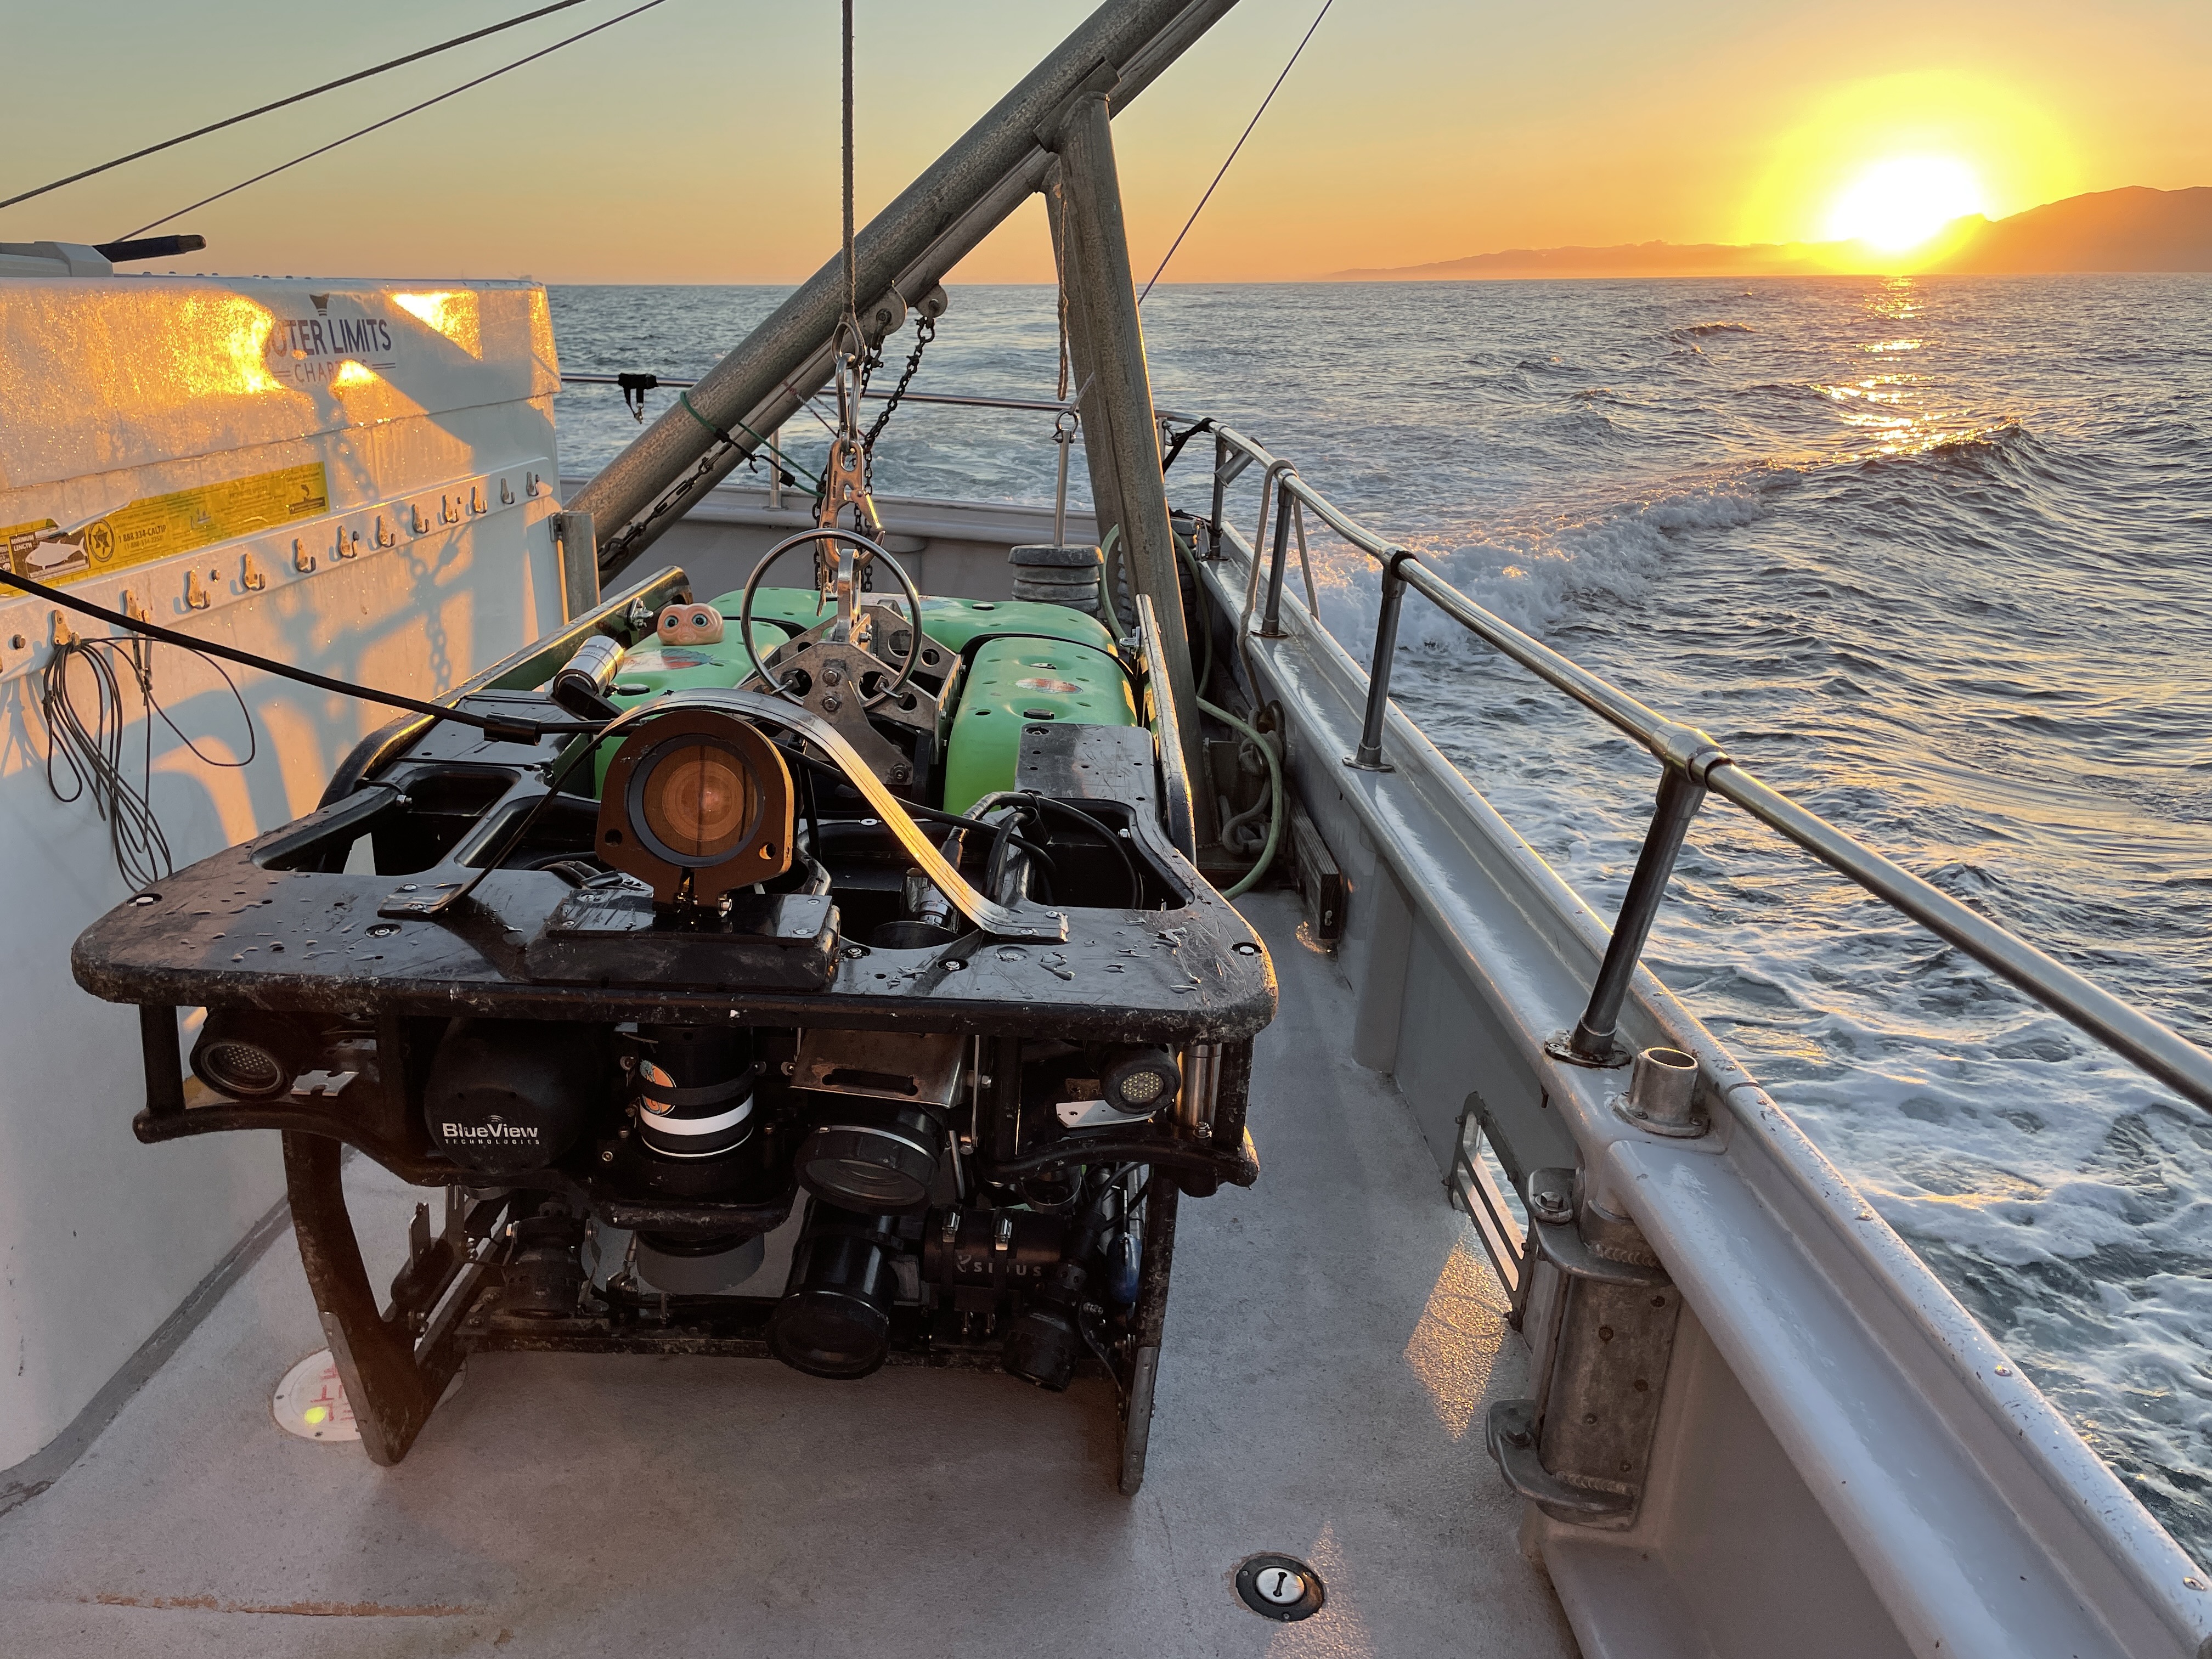 The remotely operated vehicle (ROV) was an important tool for the research team. 